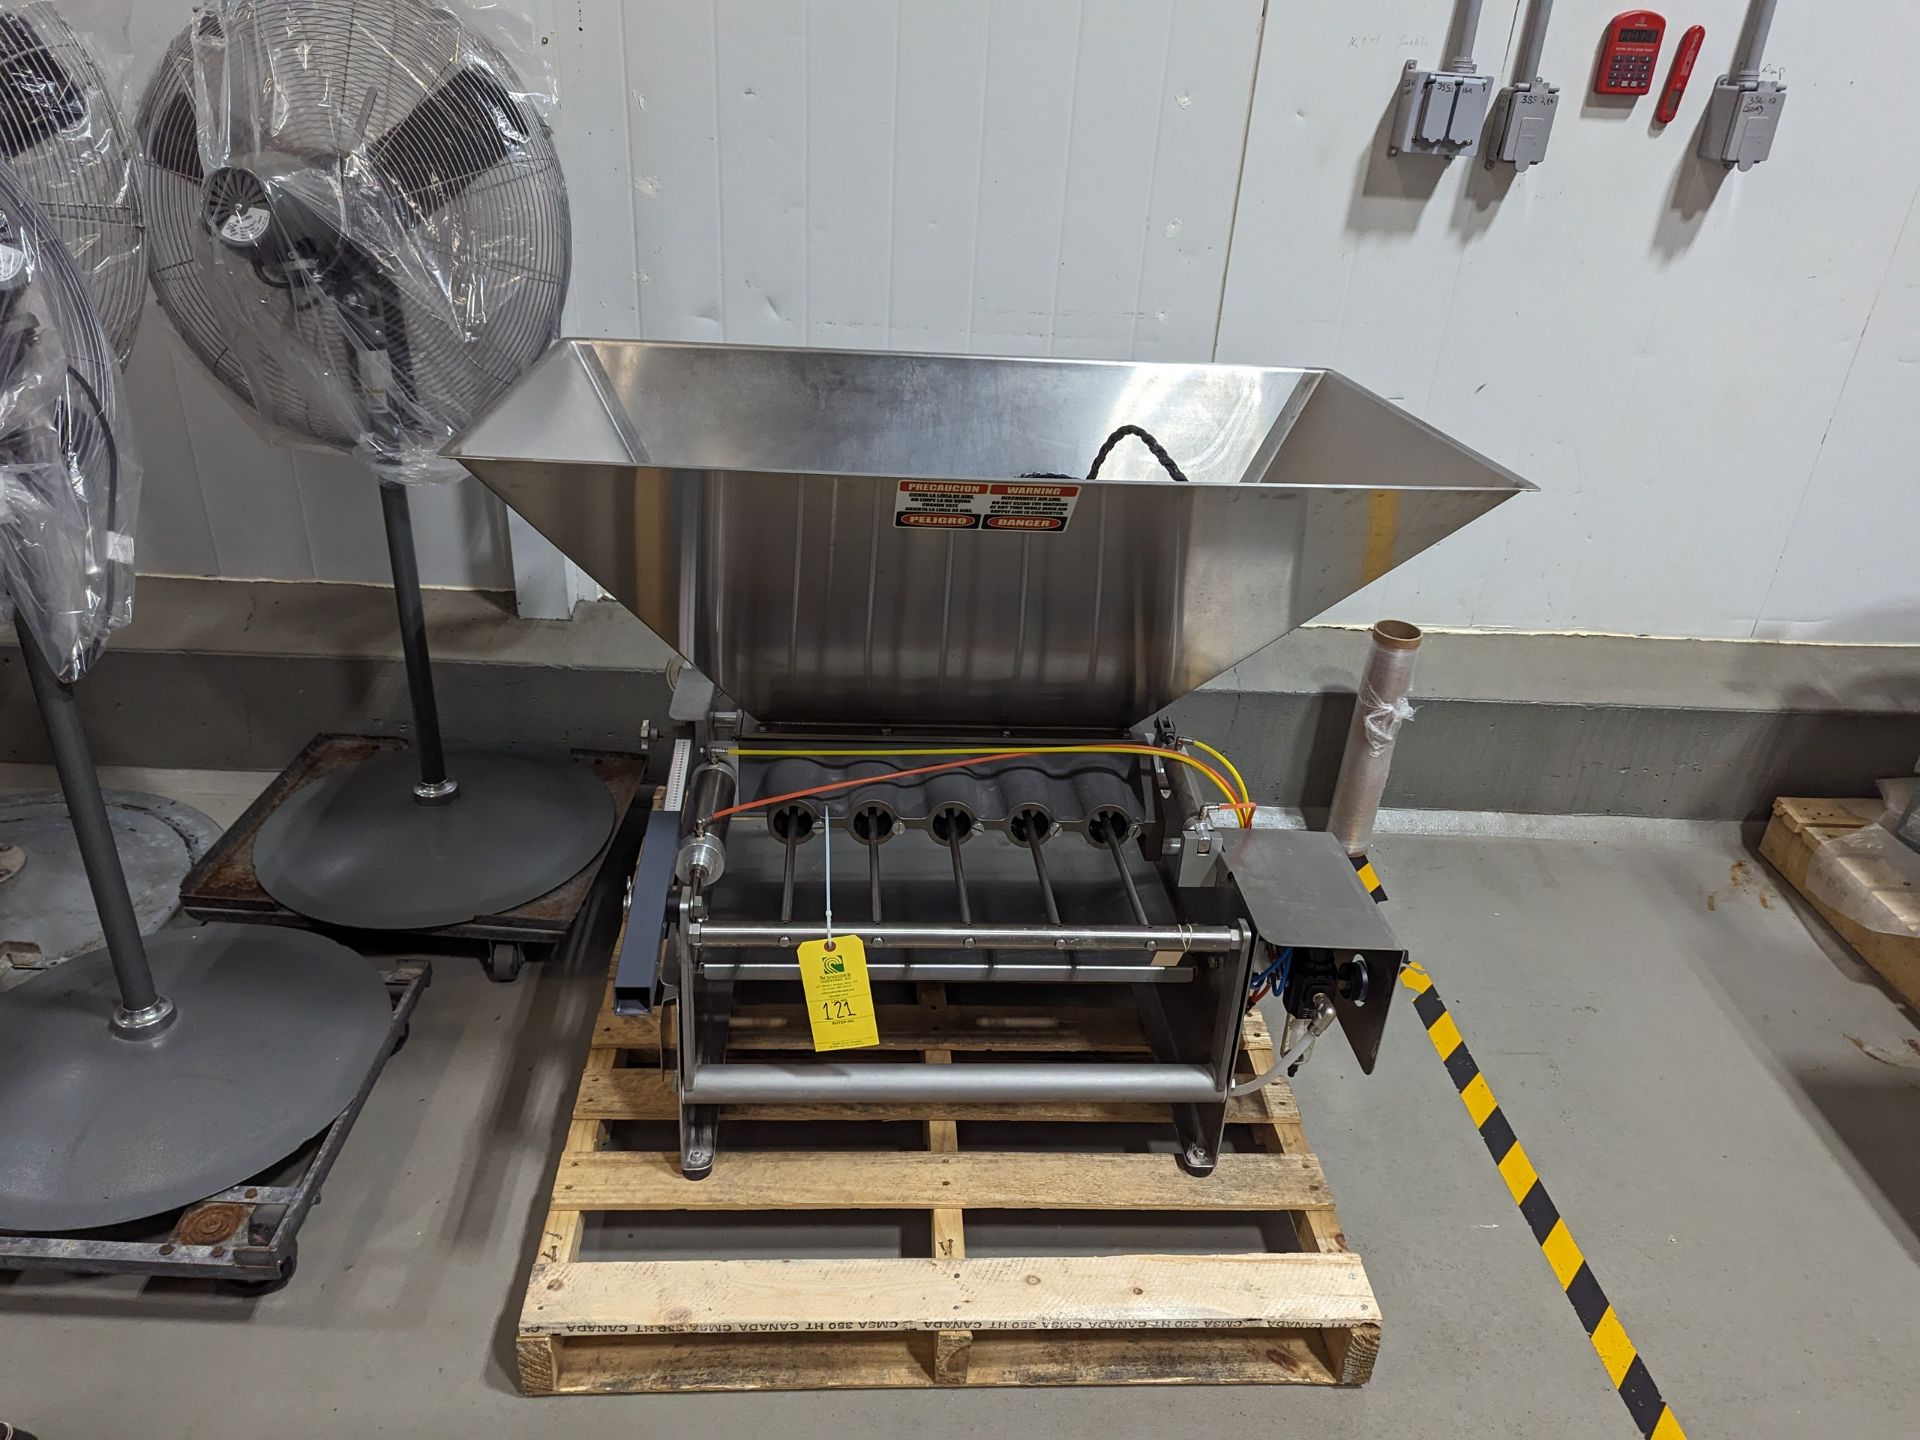 Hinds-Bock 5P-08WT Muffin Piston Depositor, Dimensions LxWxH: 48x40x56 - Image 3 of 5